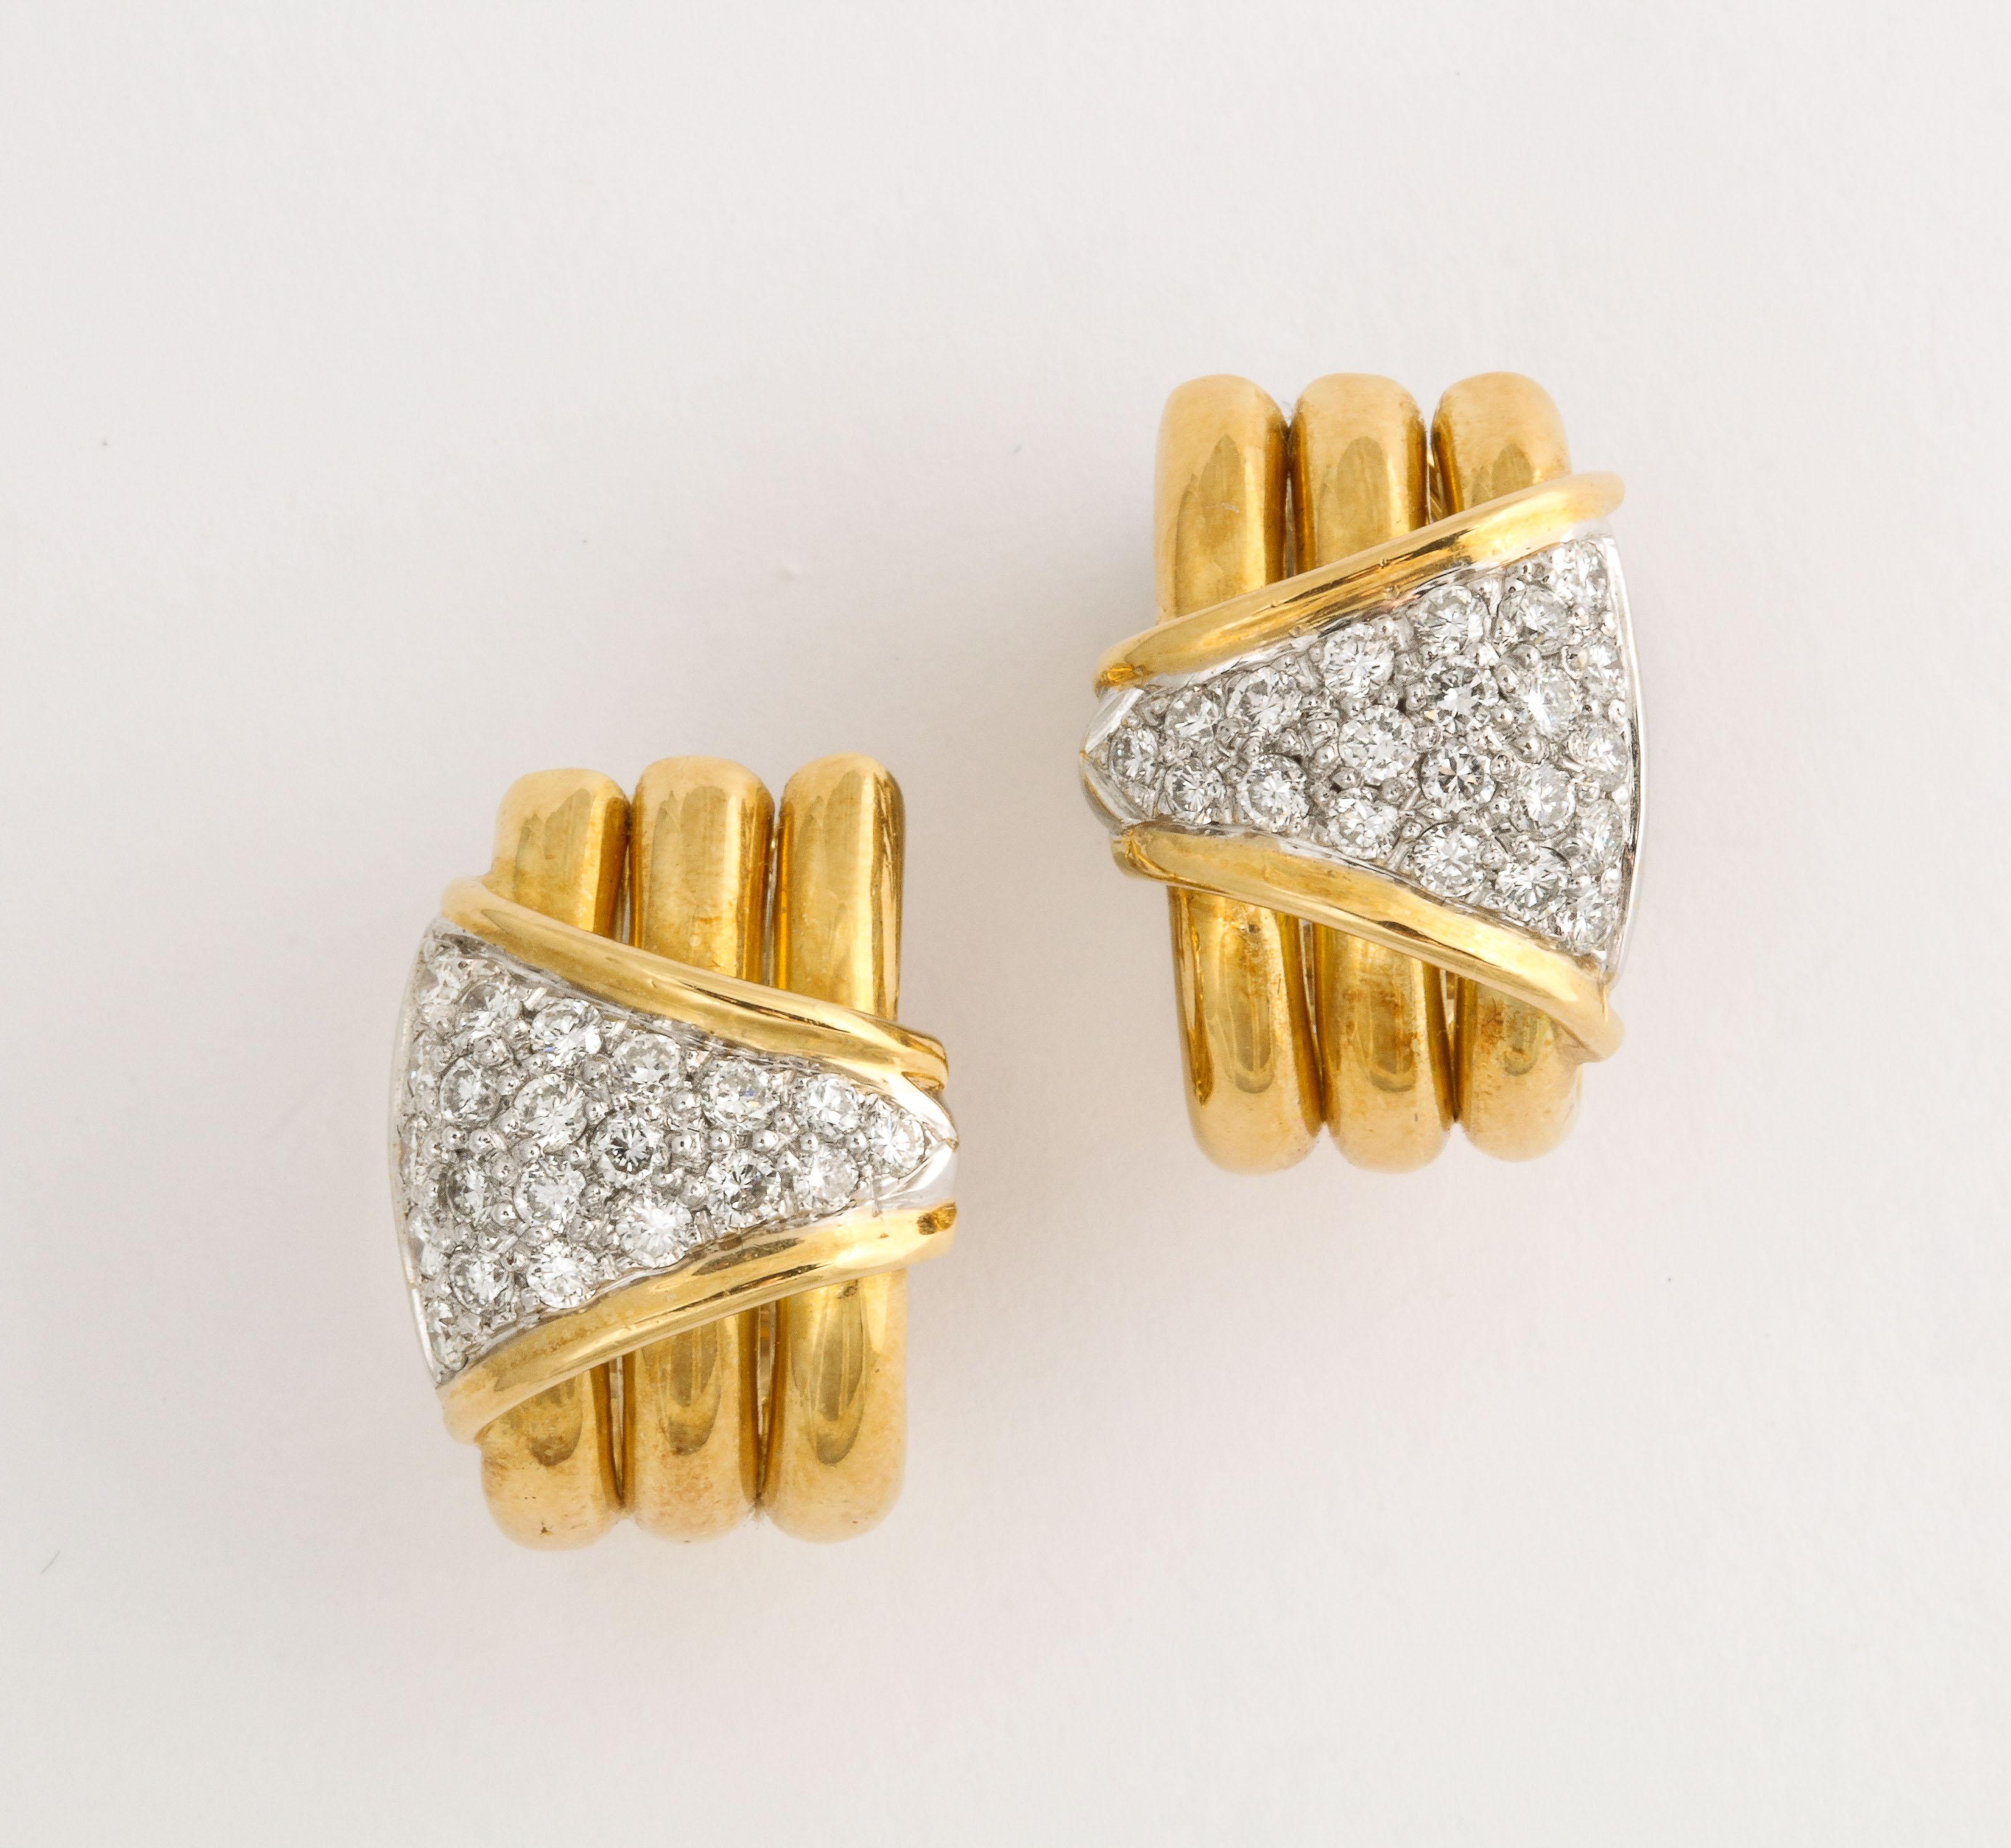 Pair of 18kt Yellow Gold  Clip on Diamond Earrings - withOmega back &  Post.  Tri Partite Hoop  with Opposing gold bordered Pave Diamond Triangular  Shapes. Marked 18kt and 750 / Italy - and Italian control Mark.  Very clean full cut Diamonds.